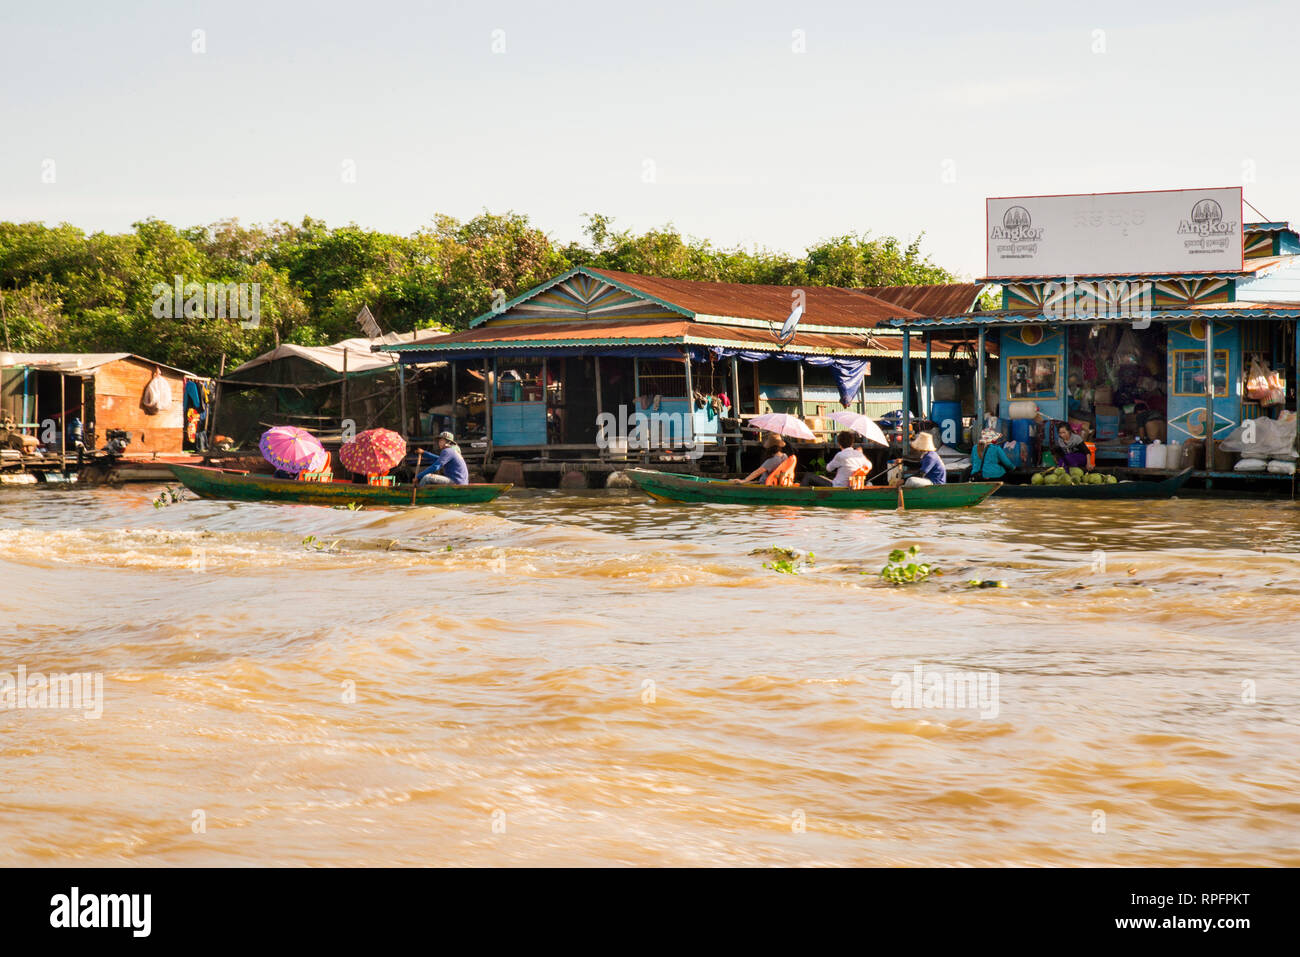 Floating village in Cambodia on the Tonle Sap Lake, the largest lake in Southeast Asia. Stock Photo